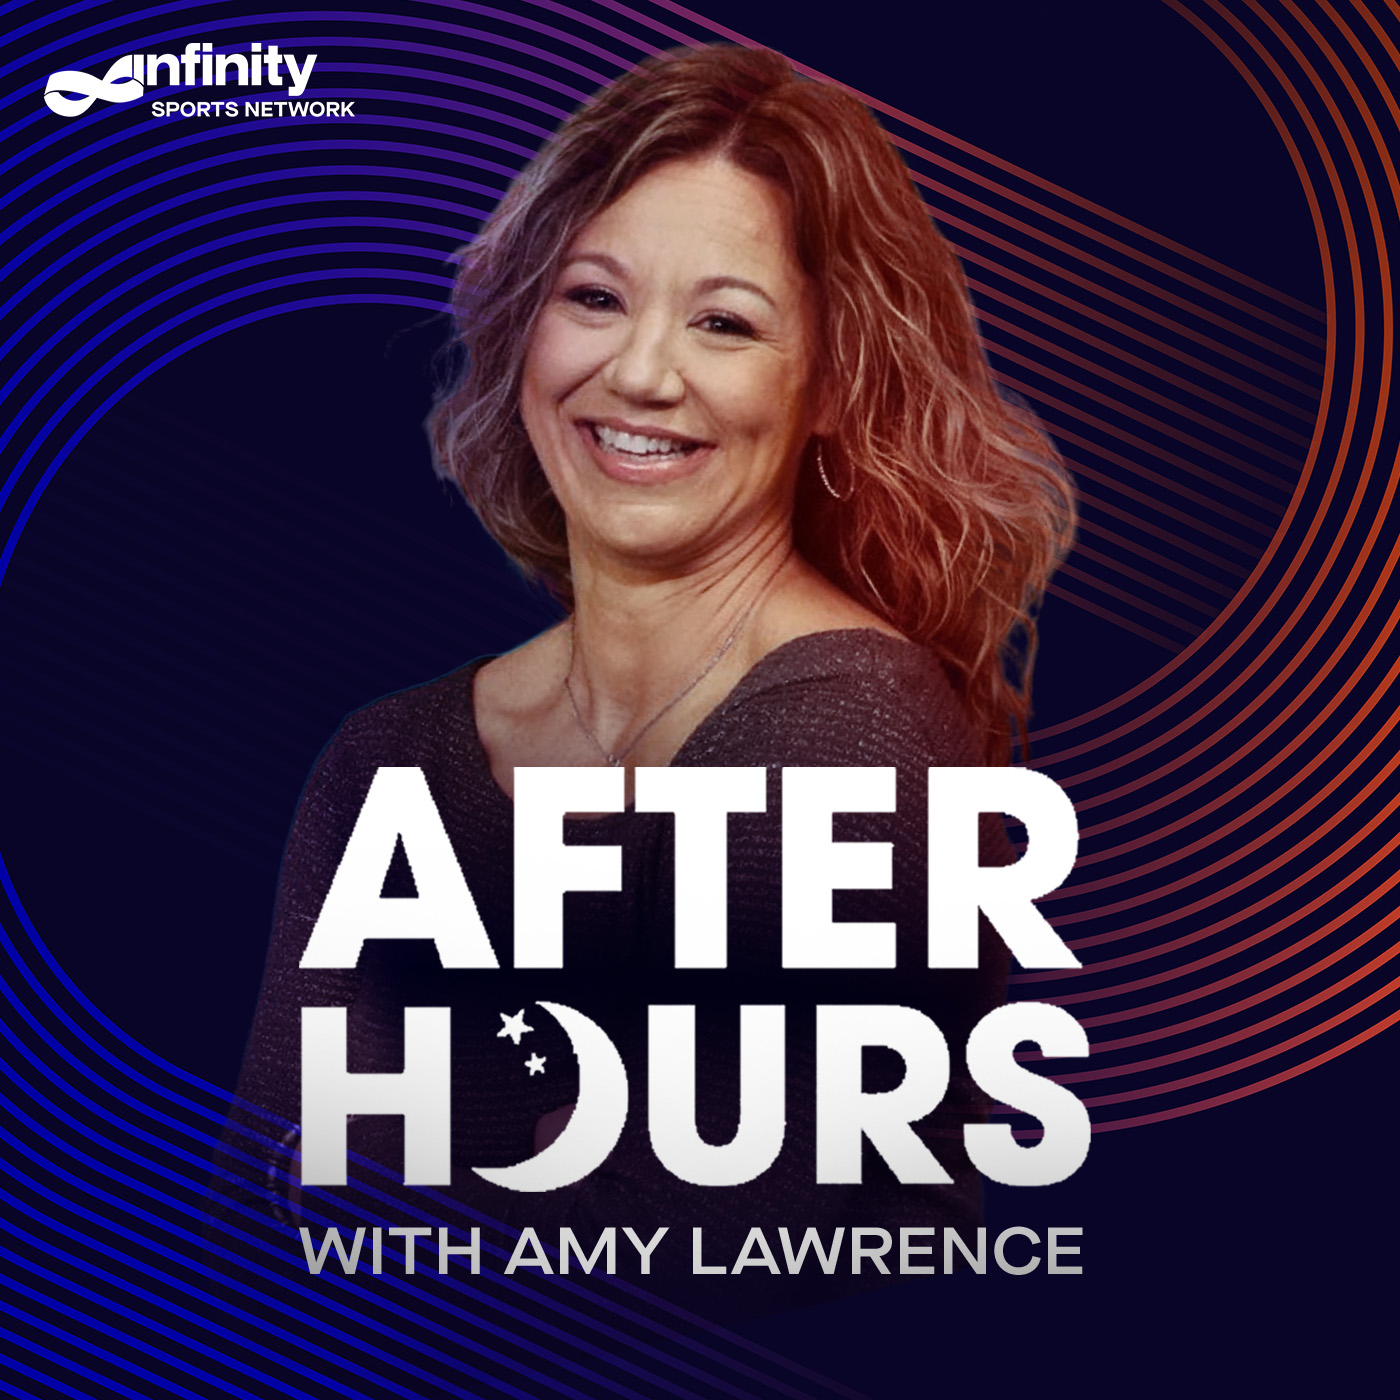 10-27-21 After Hours with Amy Lawrence PODCAST: Hour 2